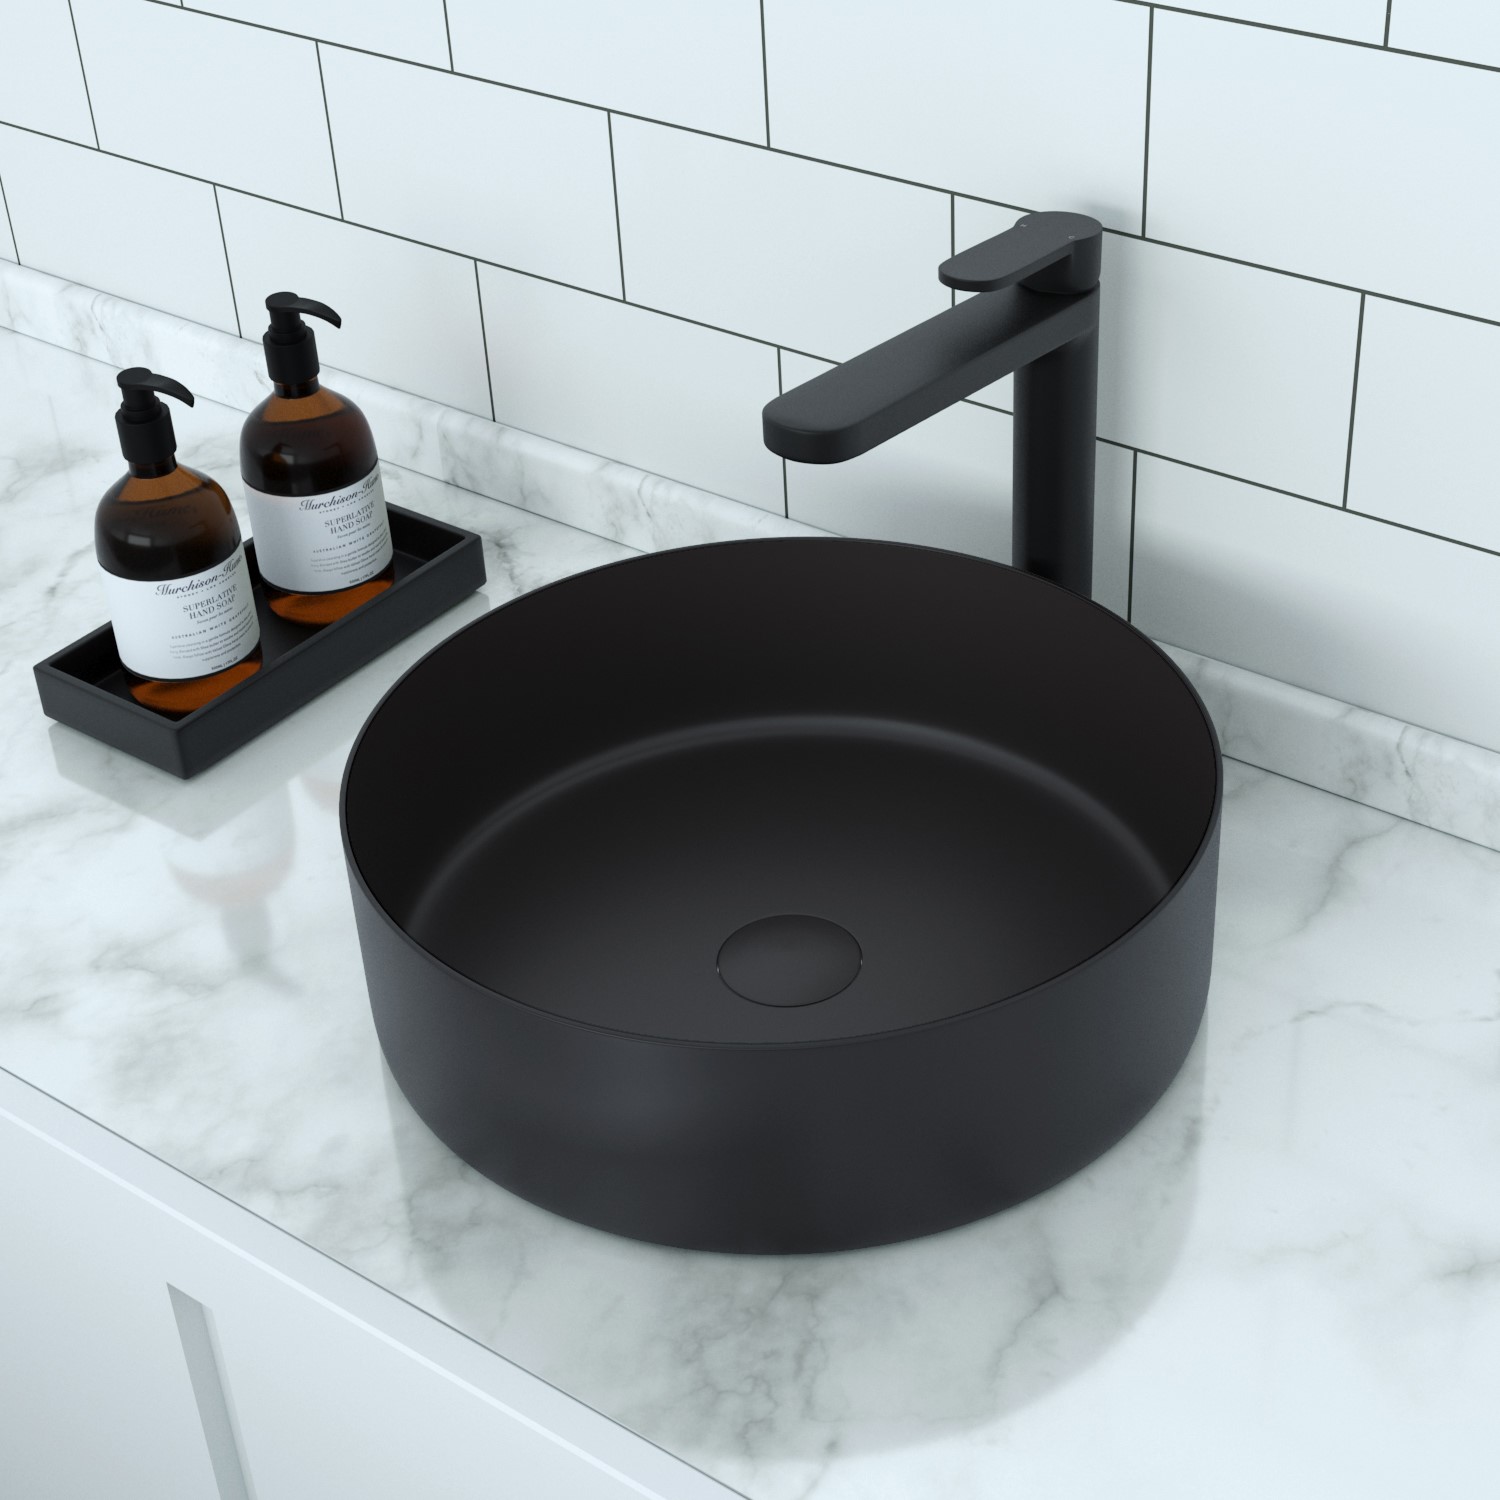 Stainless Steel Black Round Countertop Basin with Tall Mixer Tap - Zorah